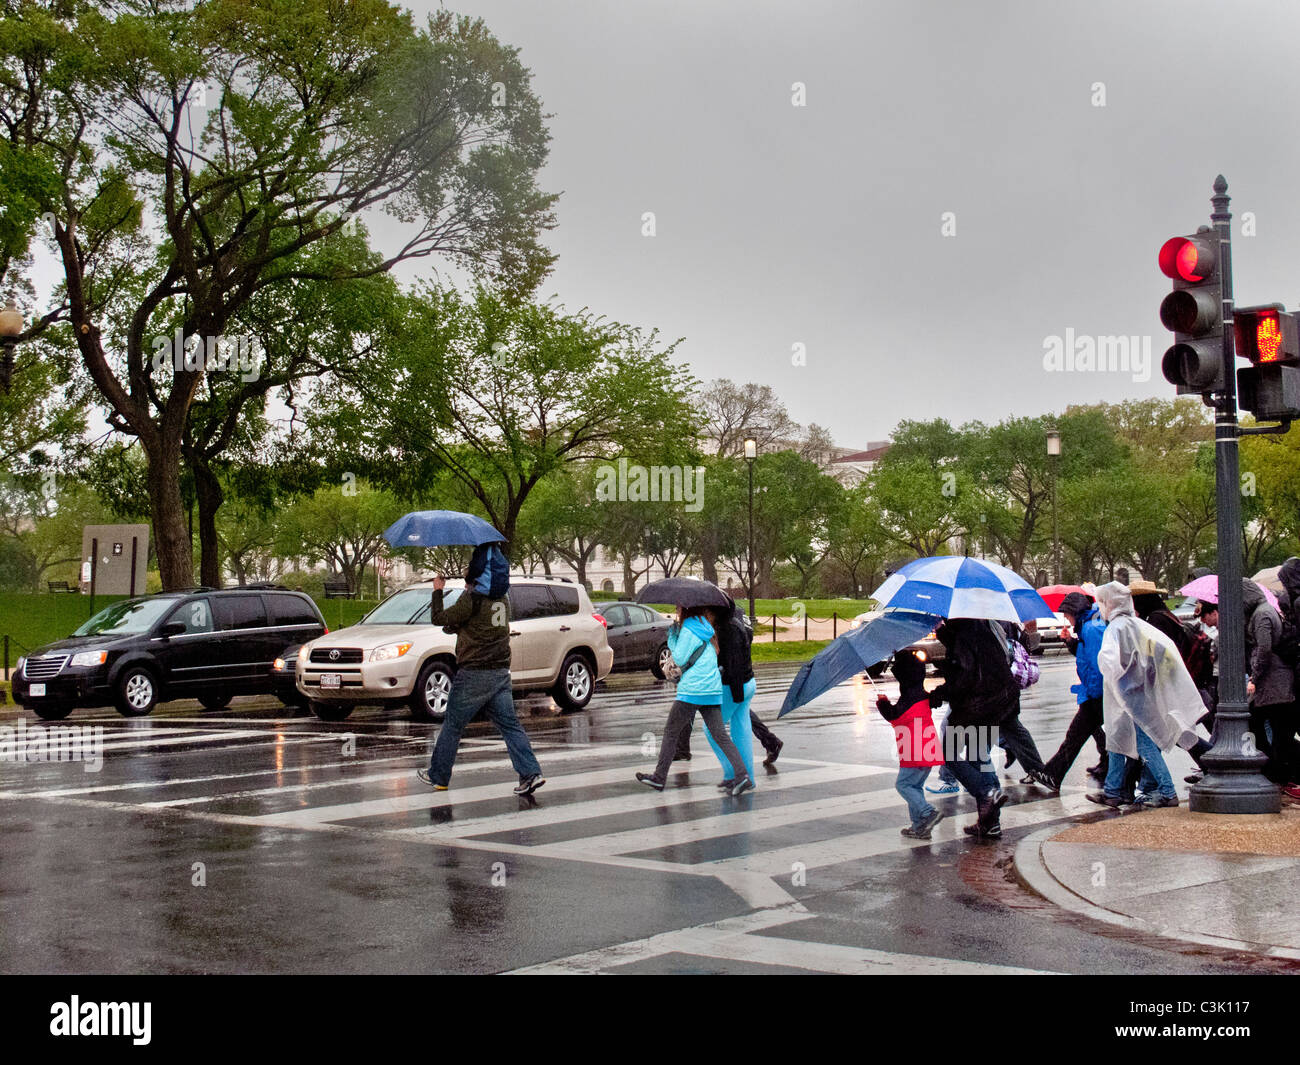 Wearing raincoats and carrying umbrellas, tourists follow a guide on a rainy day on the National Mall in Washington, D.C. Stock Photo